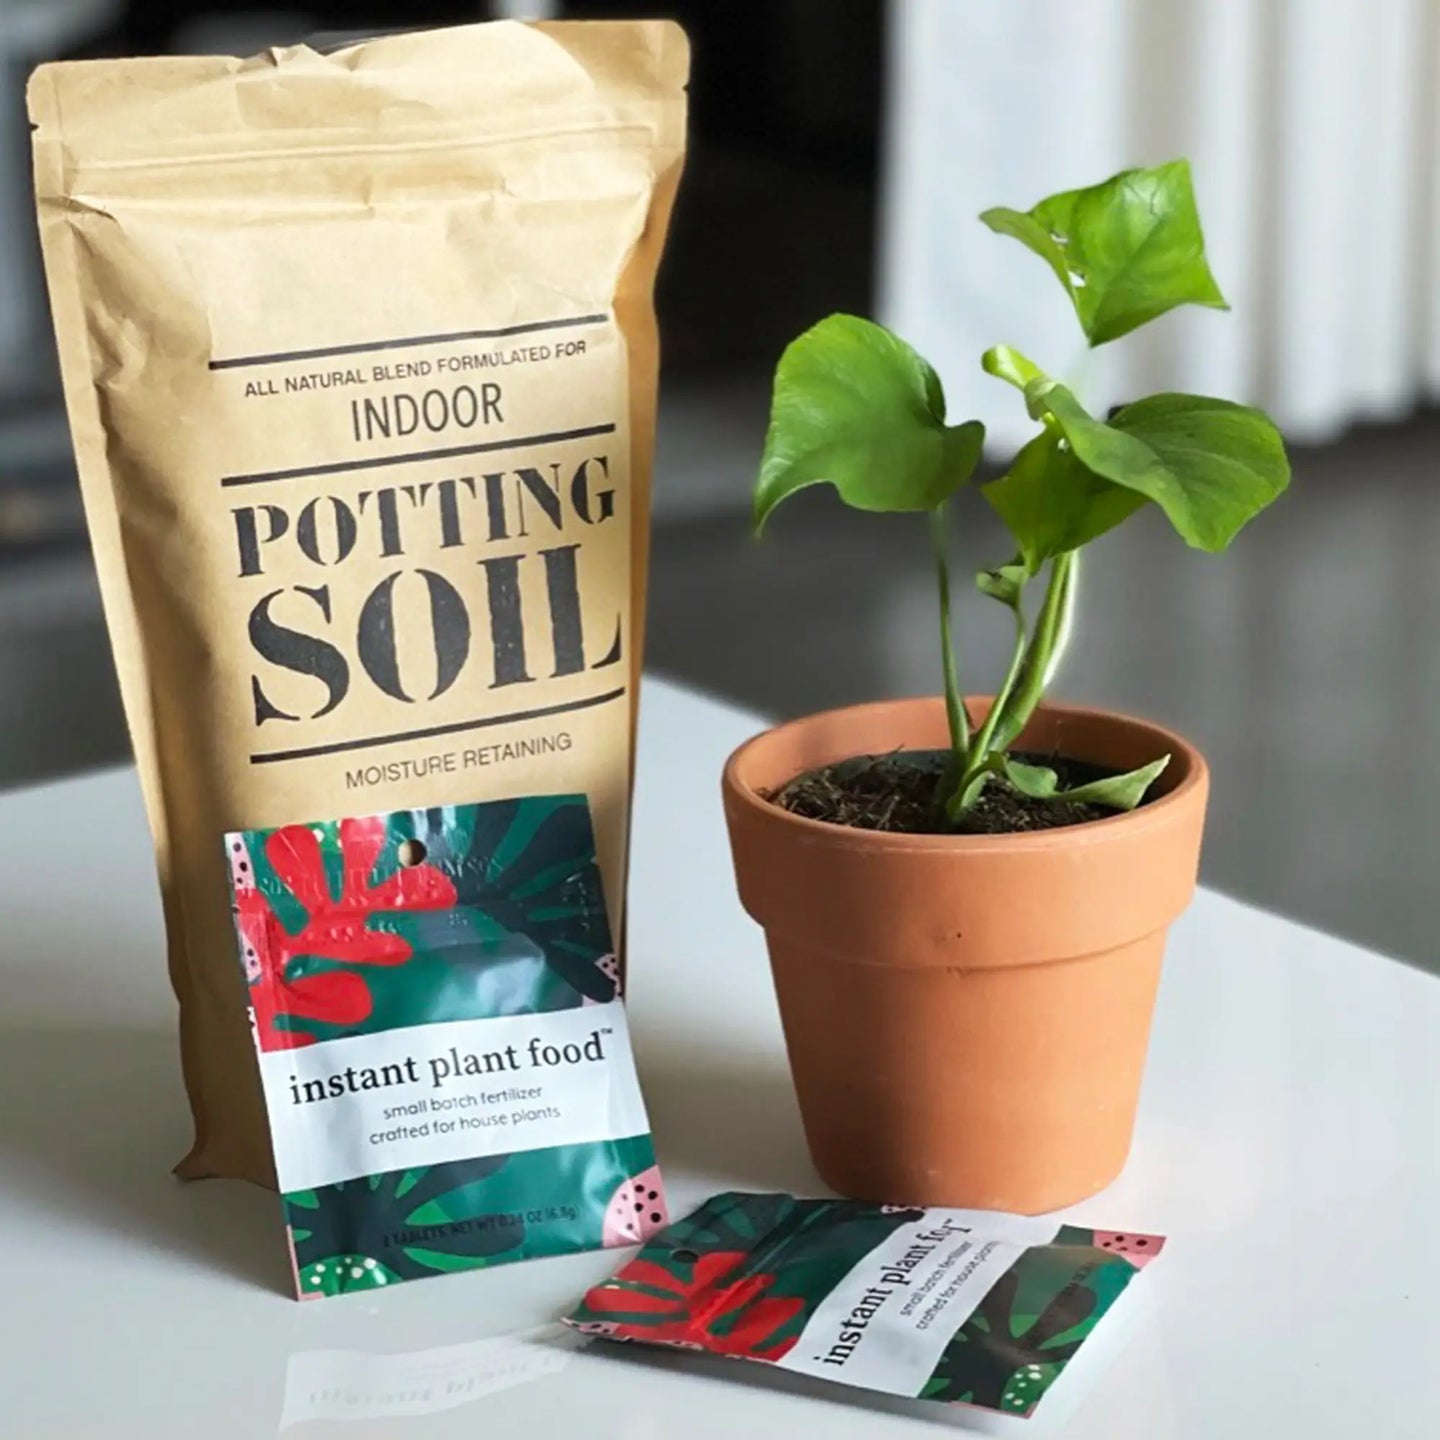 Instant Plant Food, multiple styles